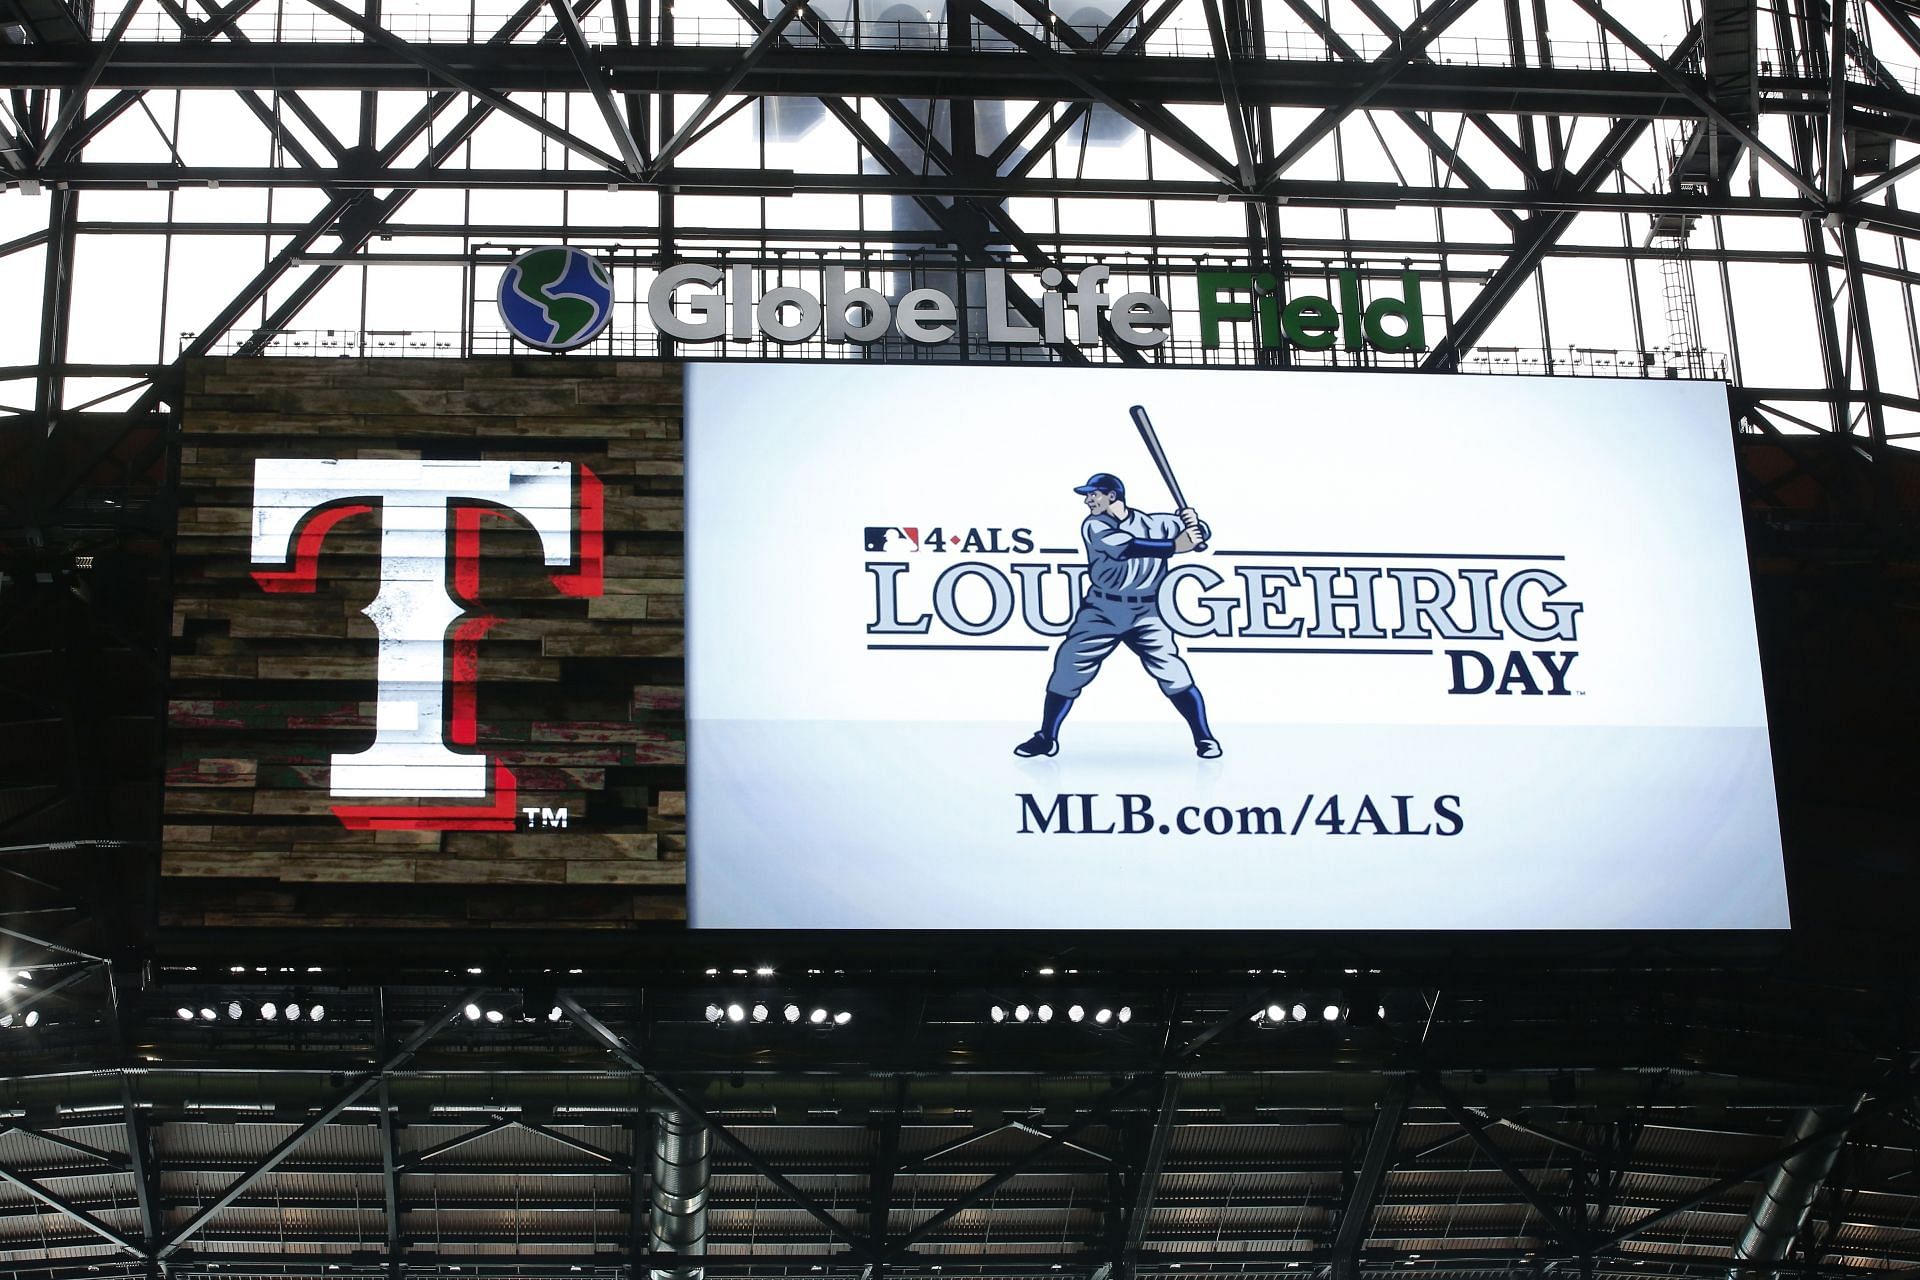 MLB & Dodgers Celebrating 2nd Annual Lou Gehrig Day